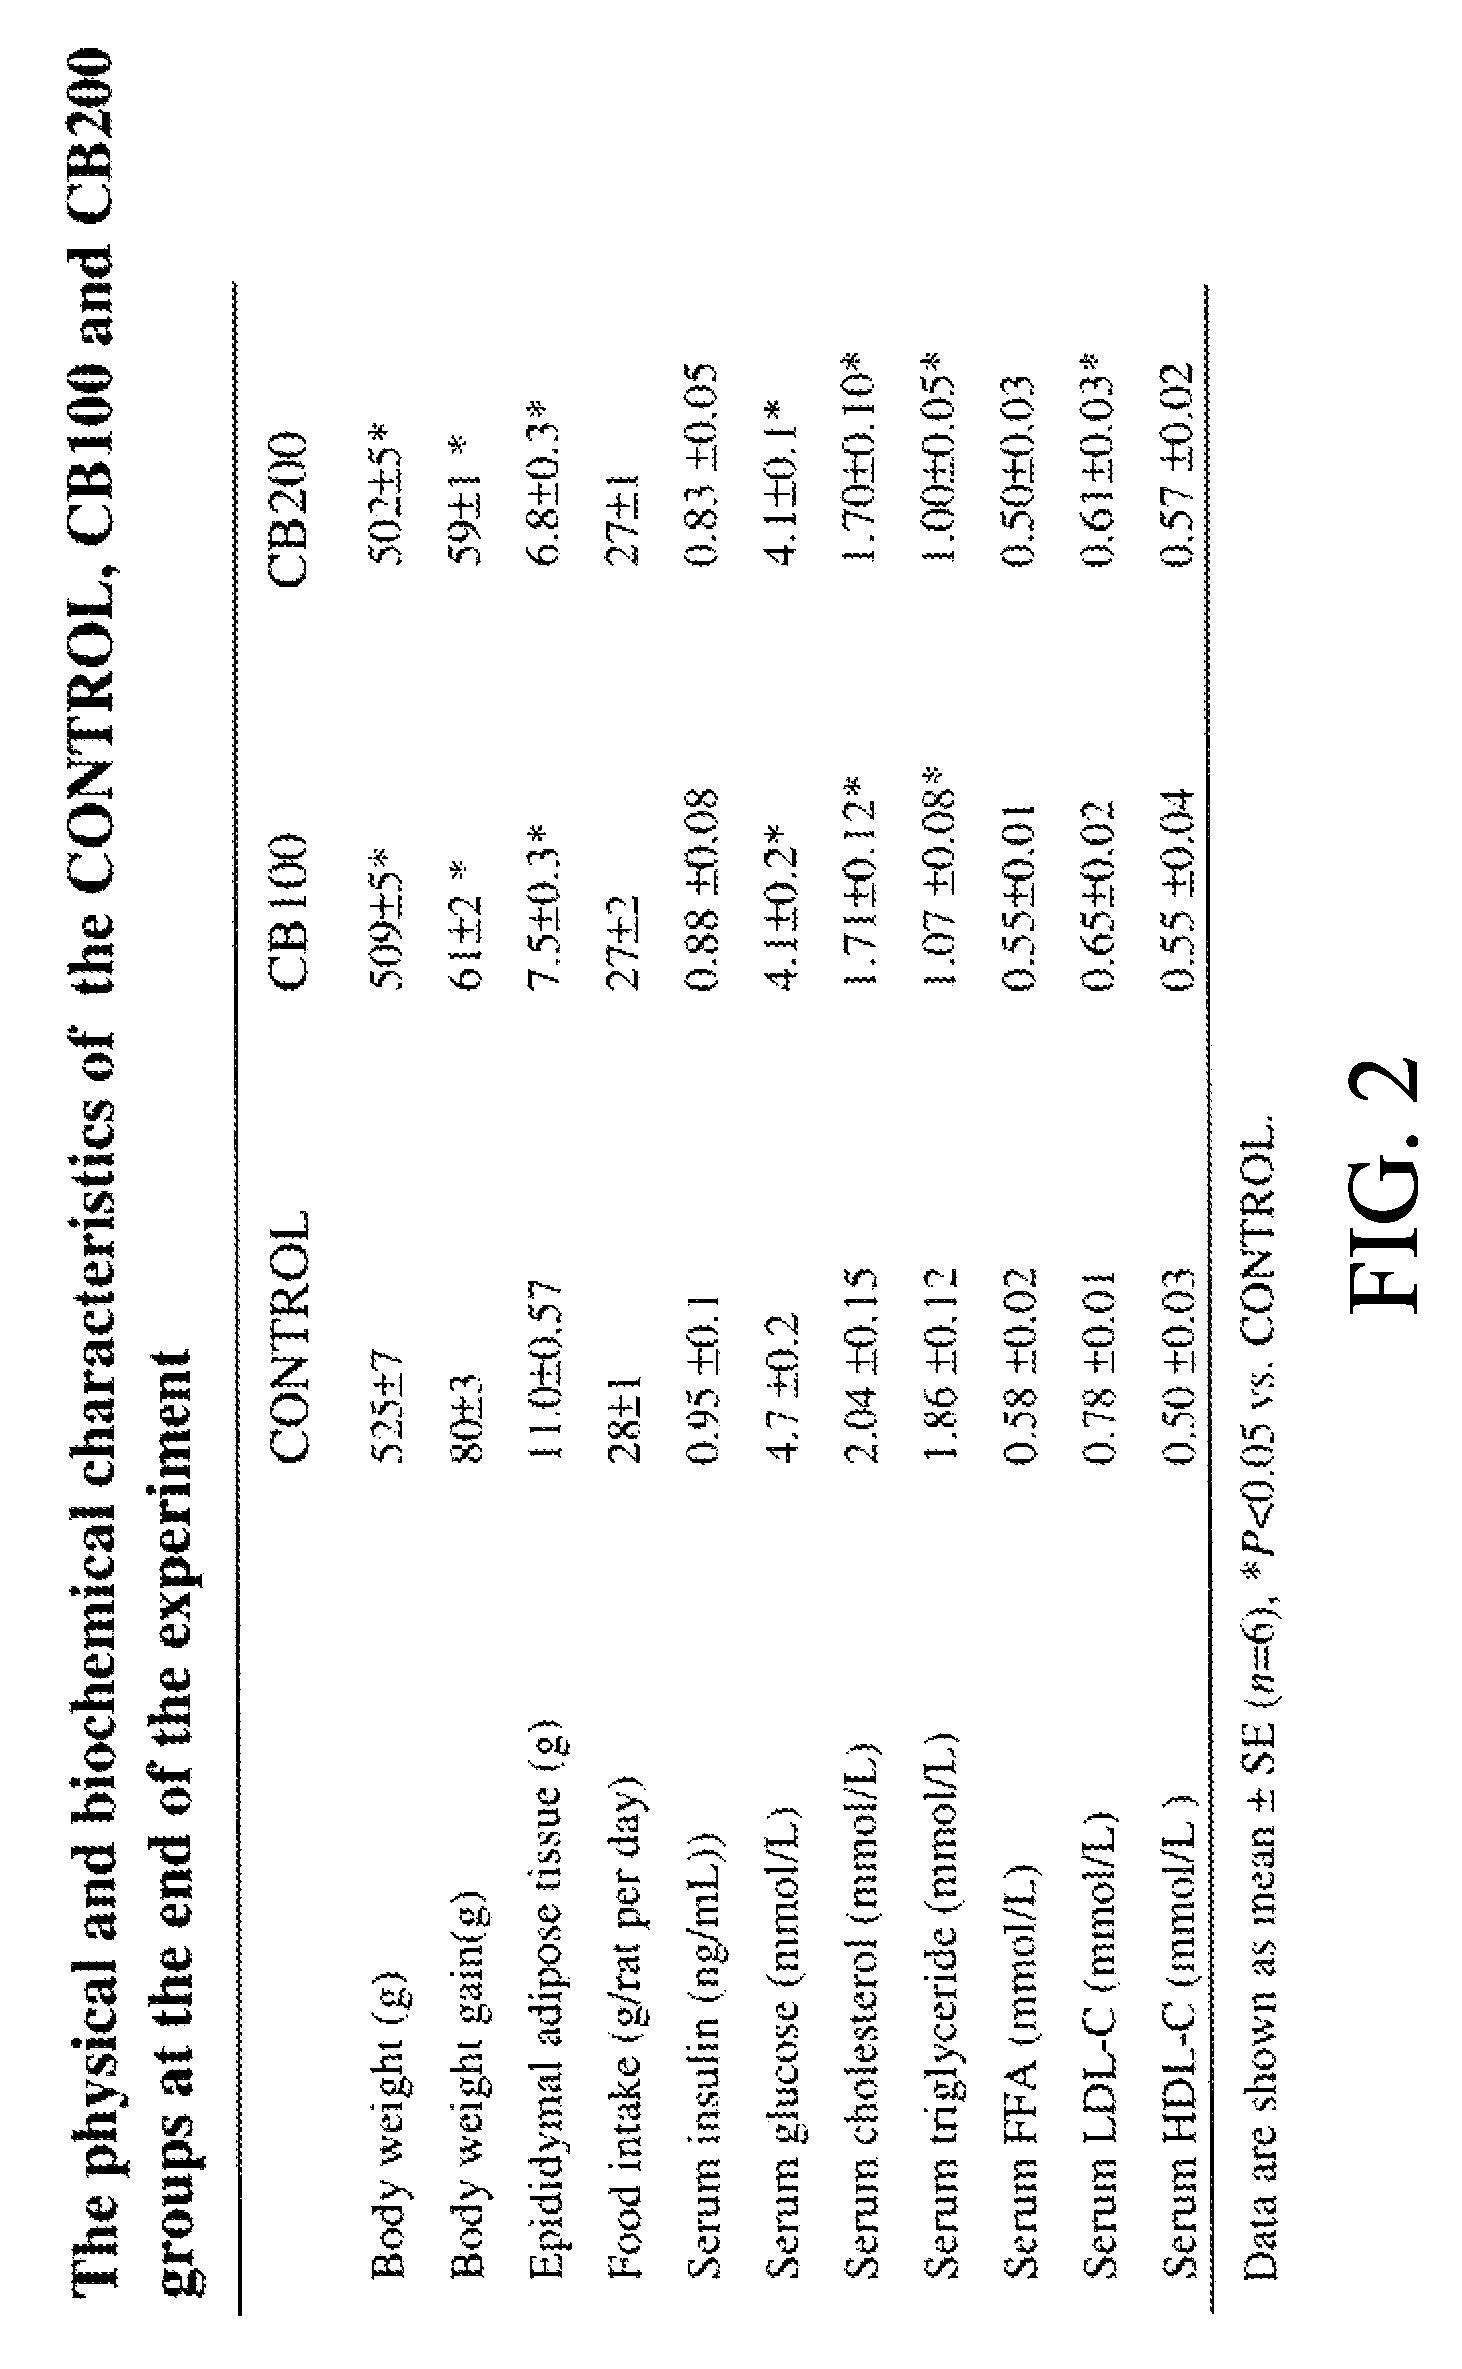 Dietary supplements containing extracts of aronia and methods of using same to promote weight loss